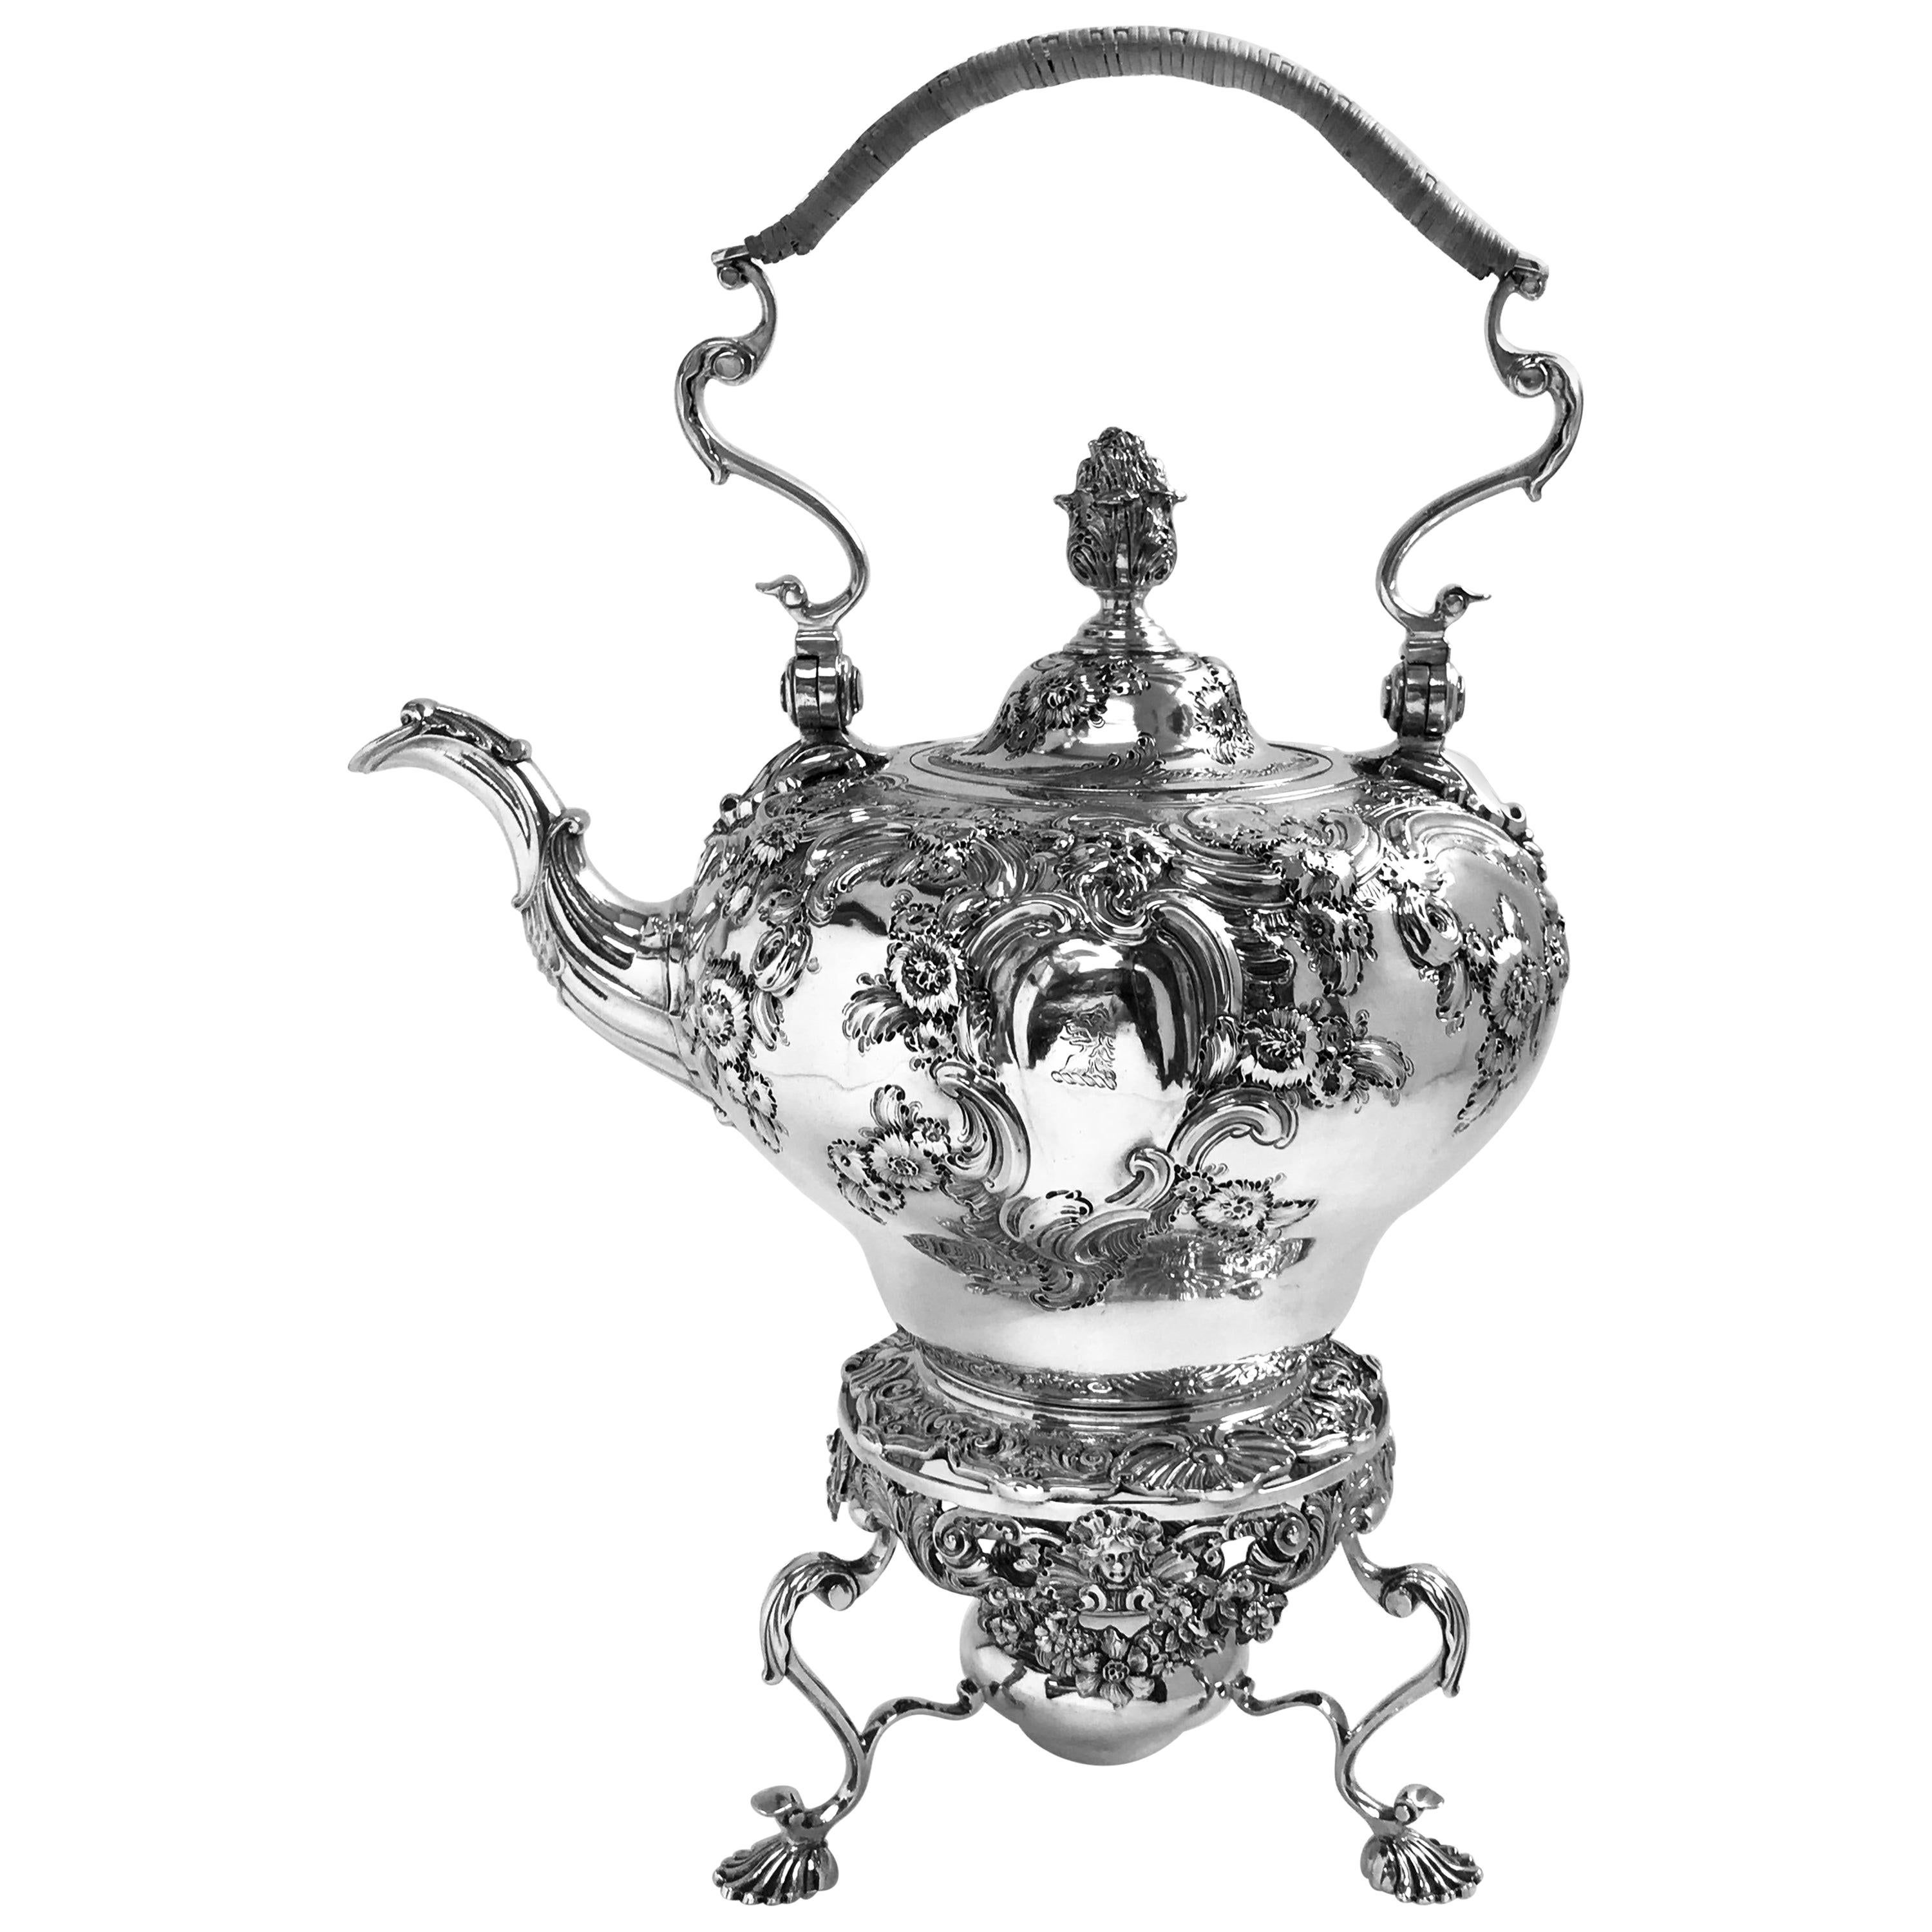 An antique English silver George II kettle with original stand and lamp, chased and embossed in the Rococo style. The lid has a flush hinge and the kettle has a wicker-weave handle.
The makers, Thomas Cooke and Richard Gurney, were well known